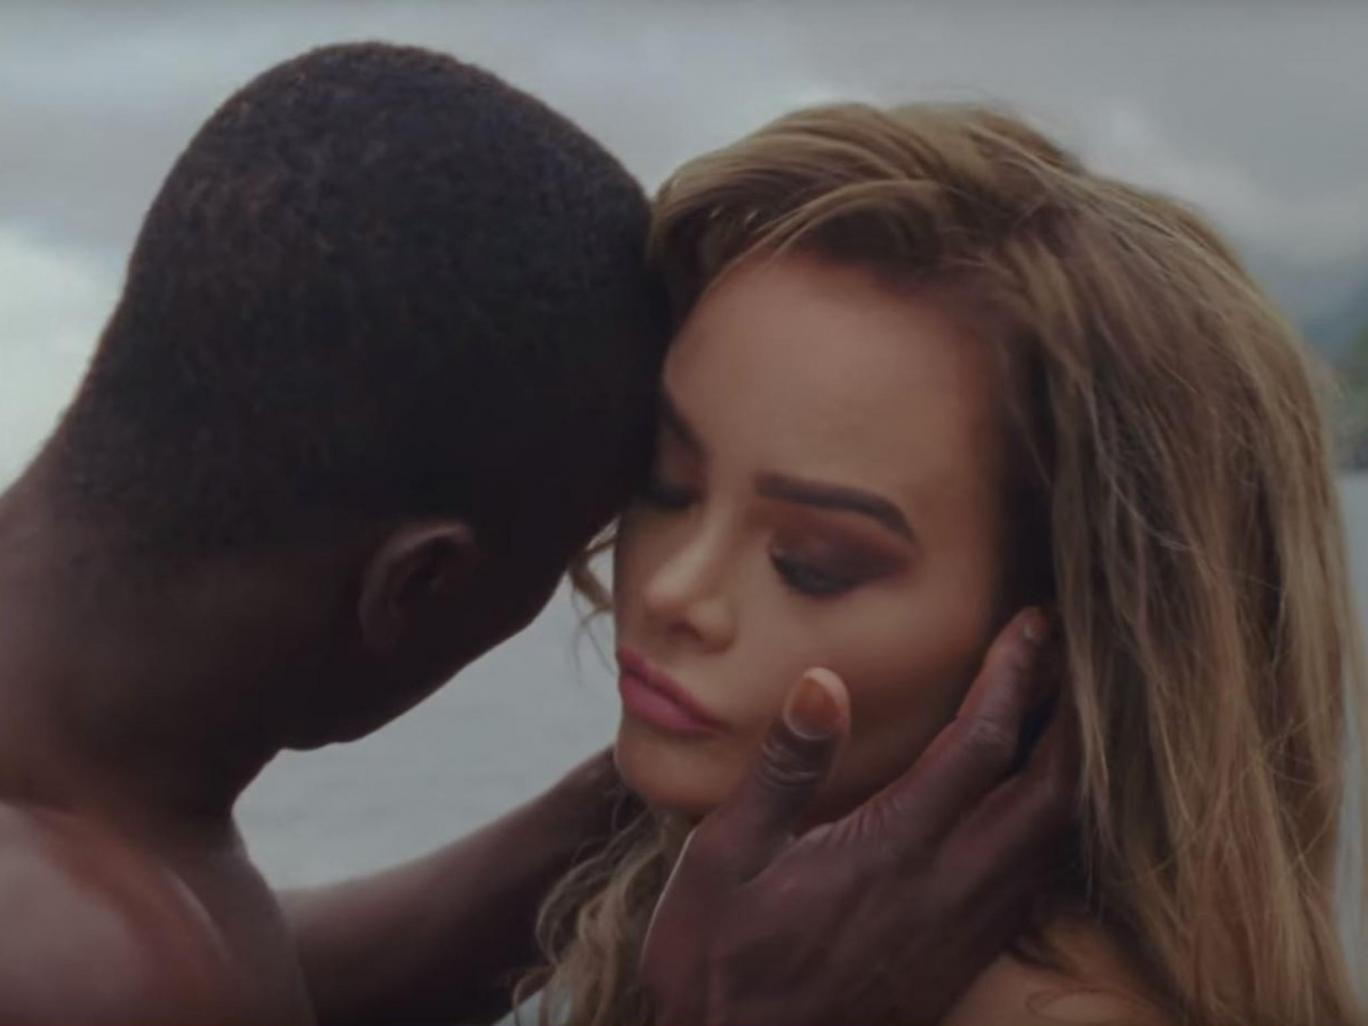 Norwegian singer Sophie Elise gets death threats after using a black actor in music video